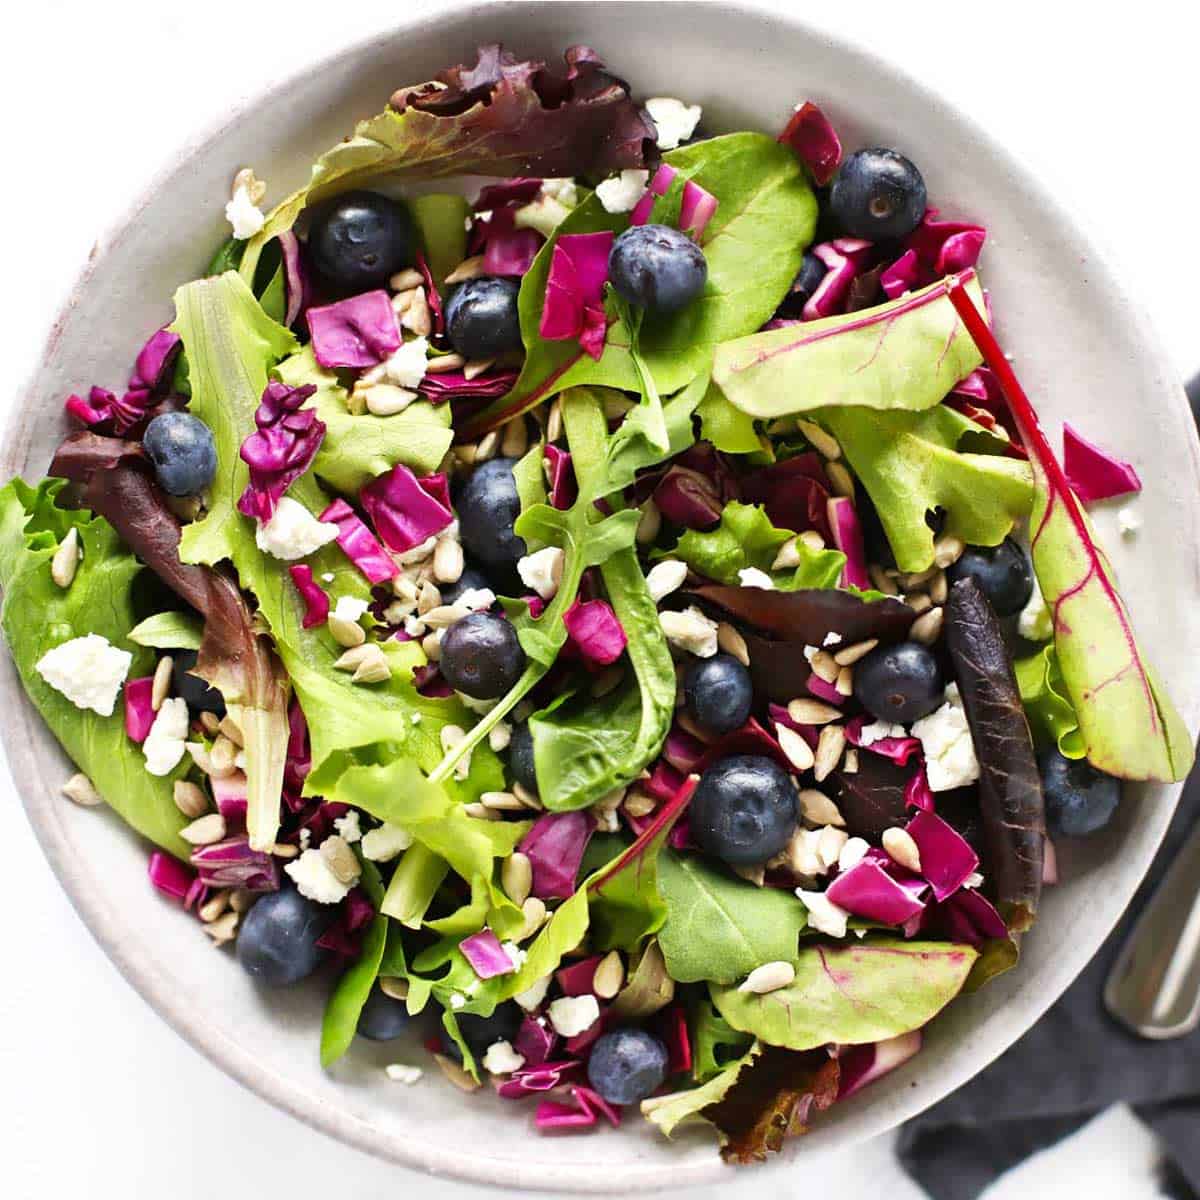 Blueberry Goat Cheese Salad with Roasted Garlic Dressing